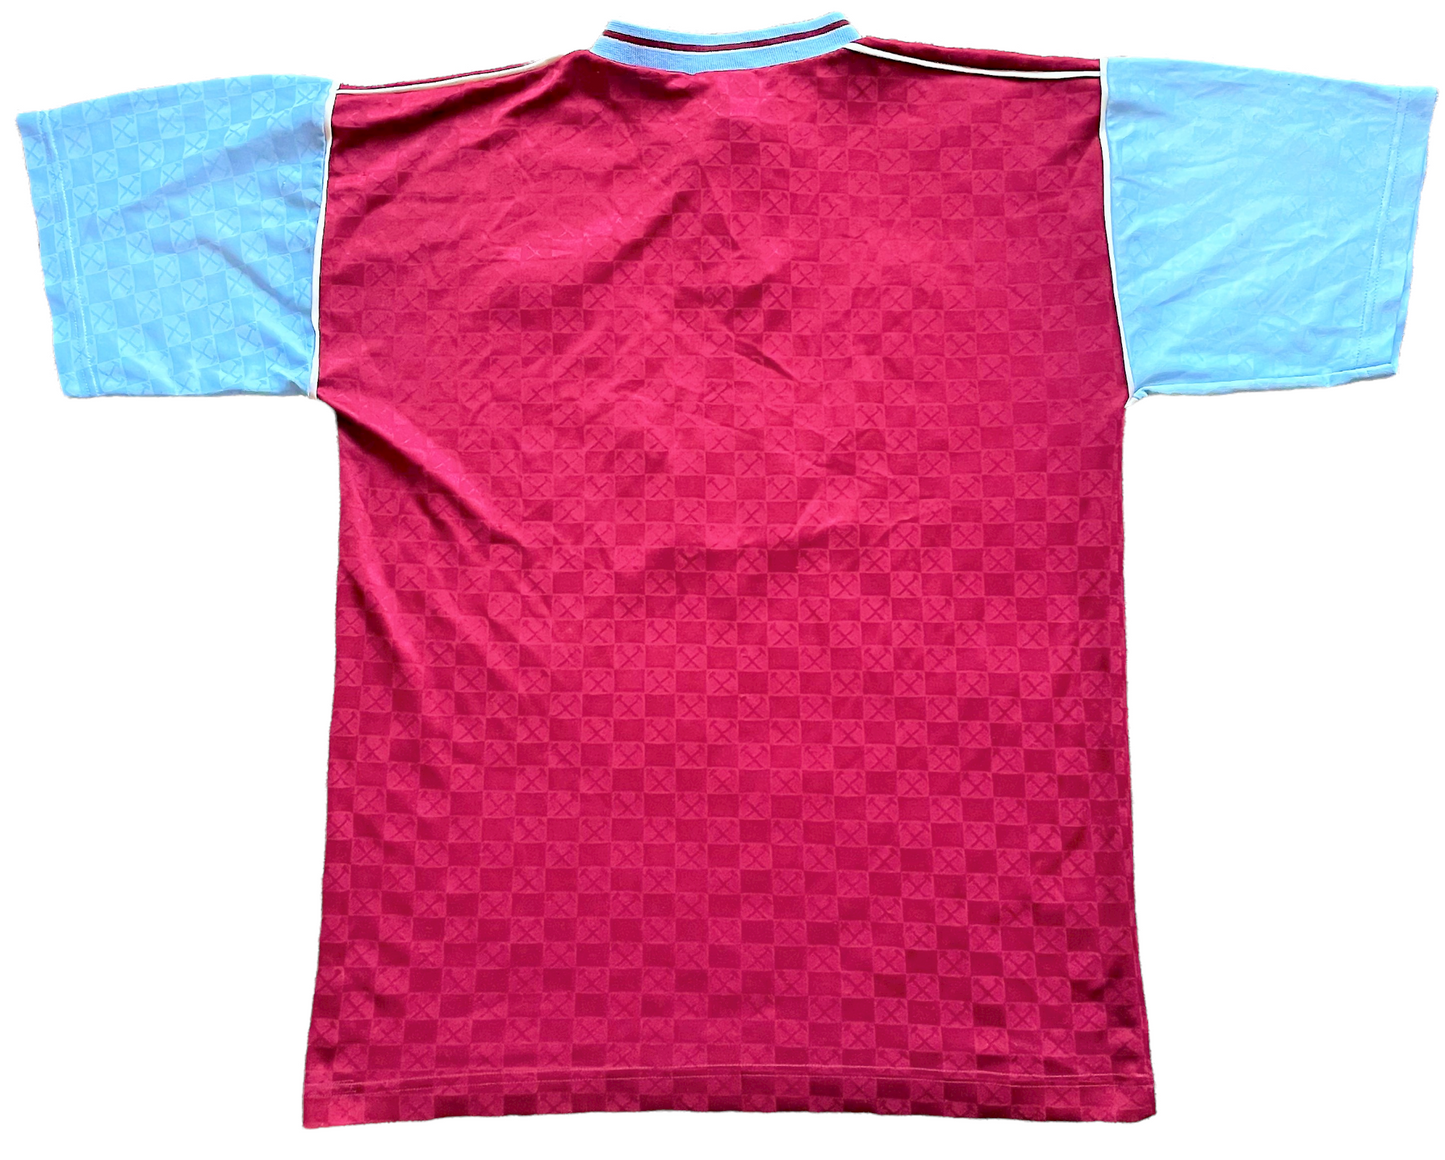 West Ham 1989 Home Shirt 1989/90 (good) No size, but is Adults Small. Height 24 inches